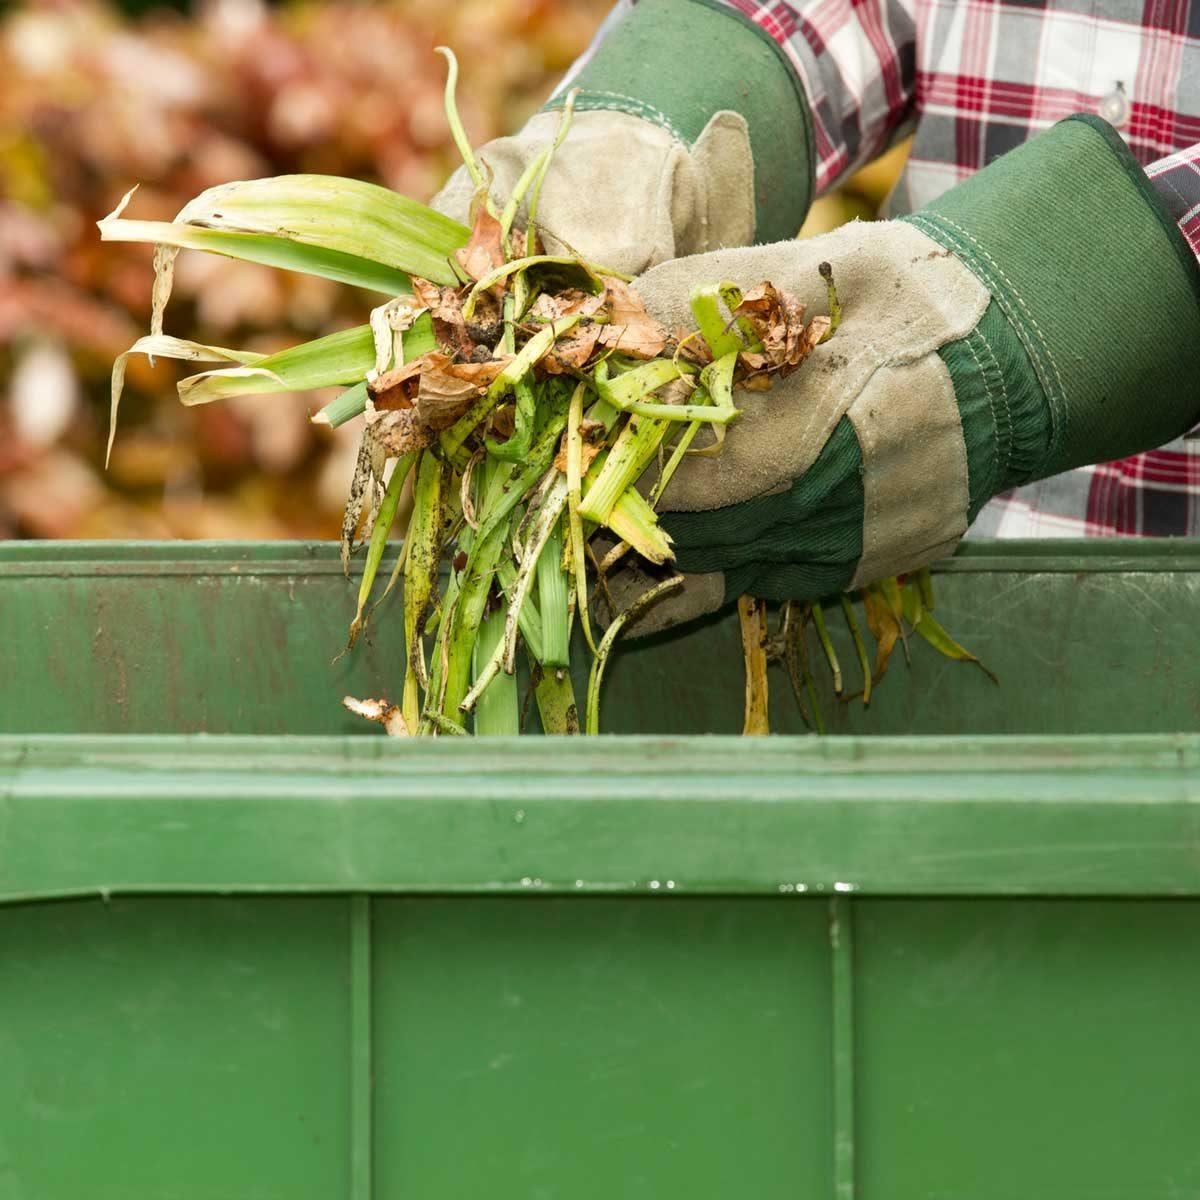 Here's What to Do With Yard Waste